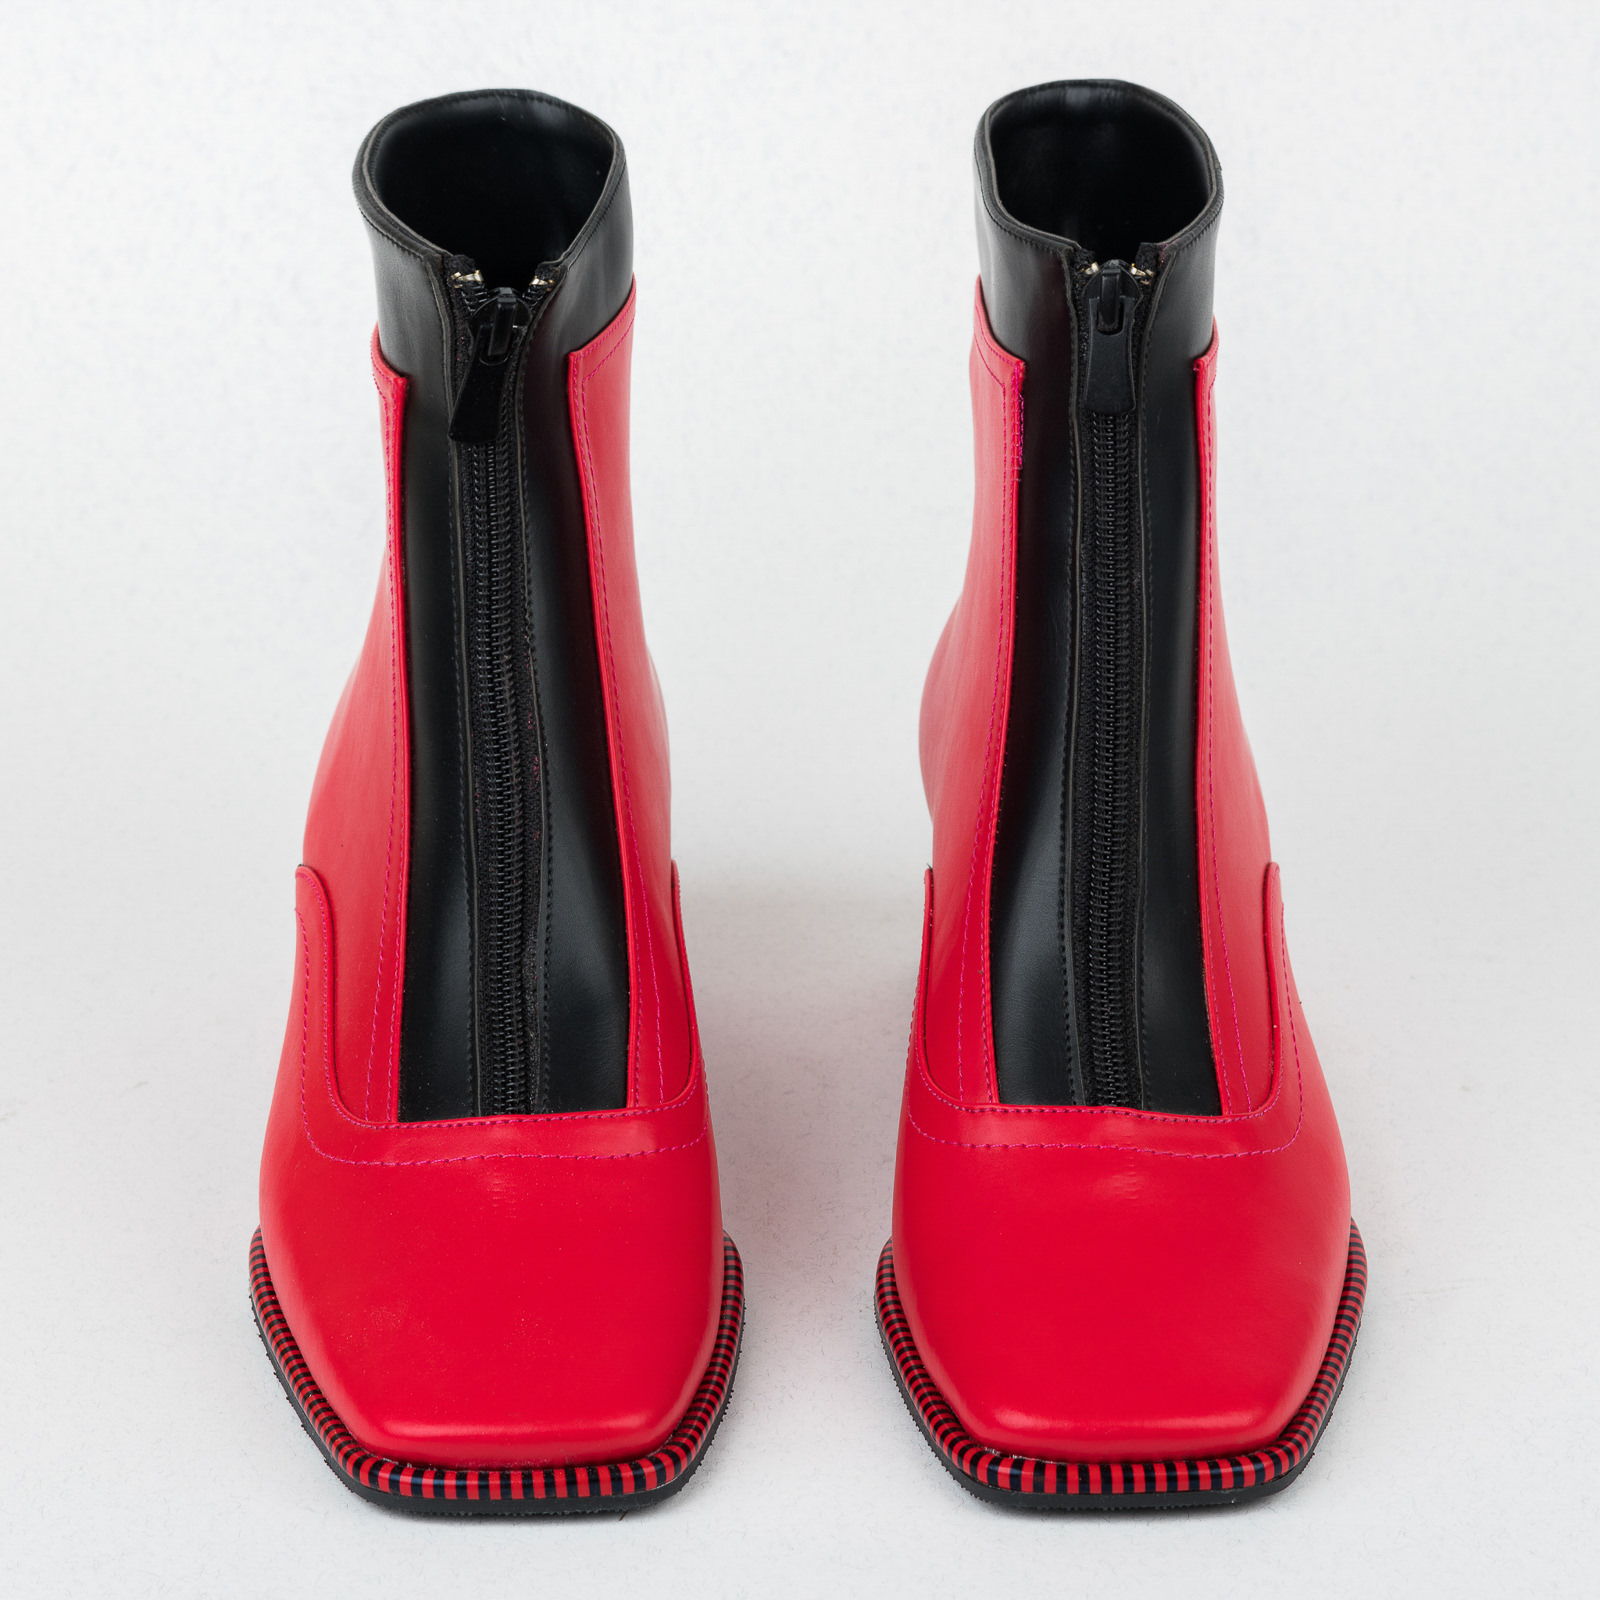 Women ankle boots B401 - RED